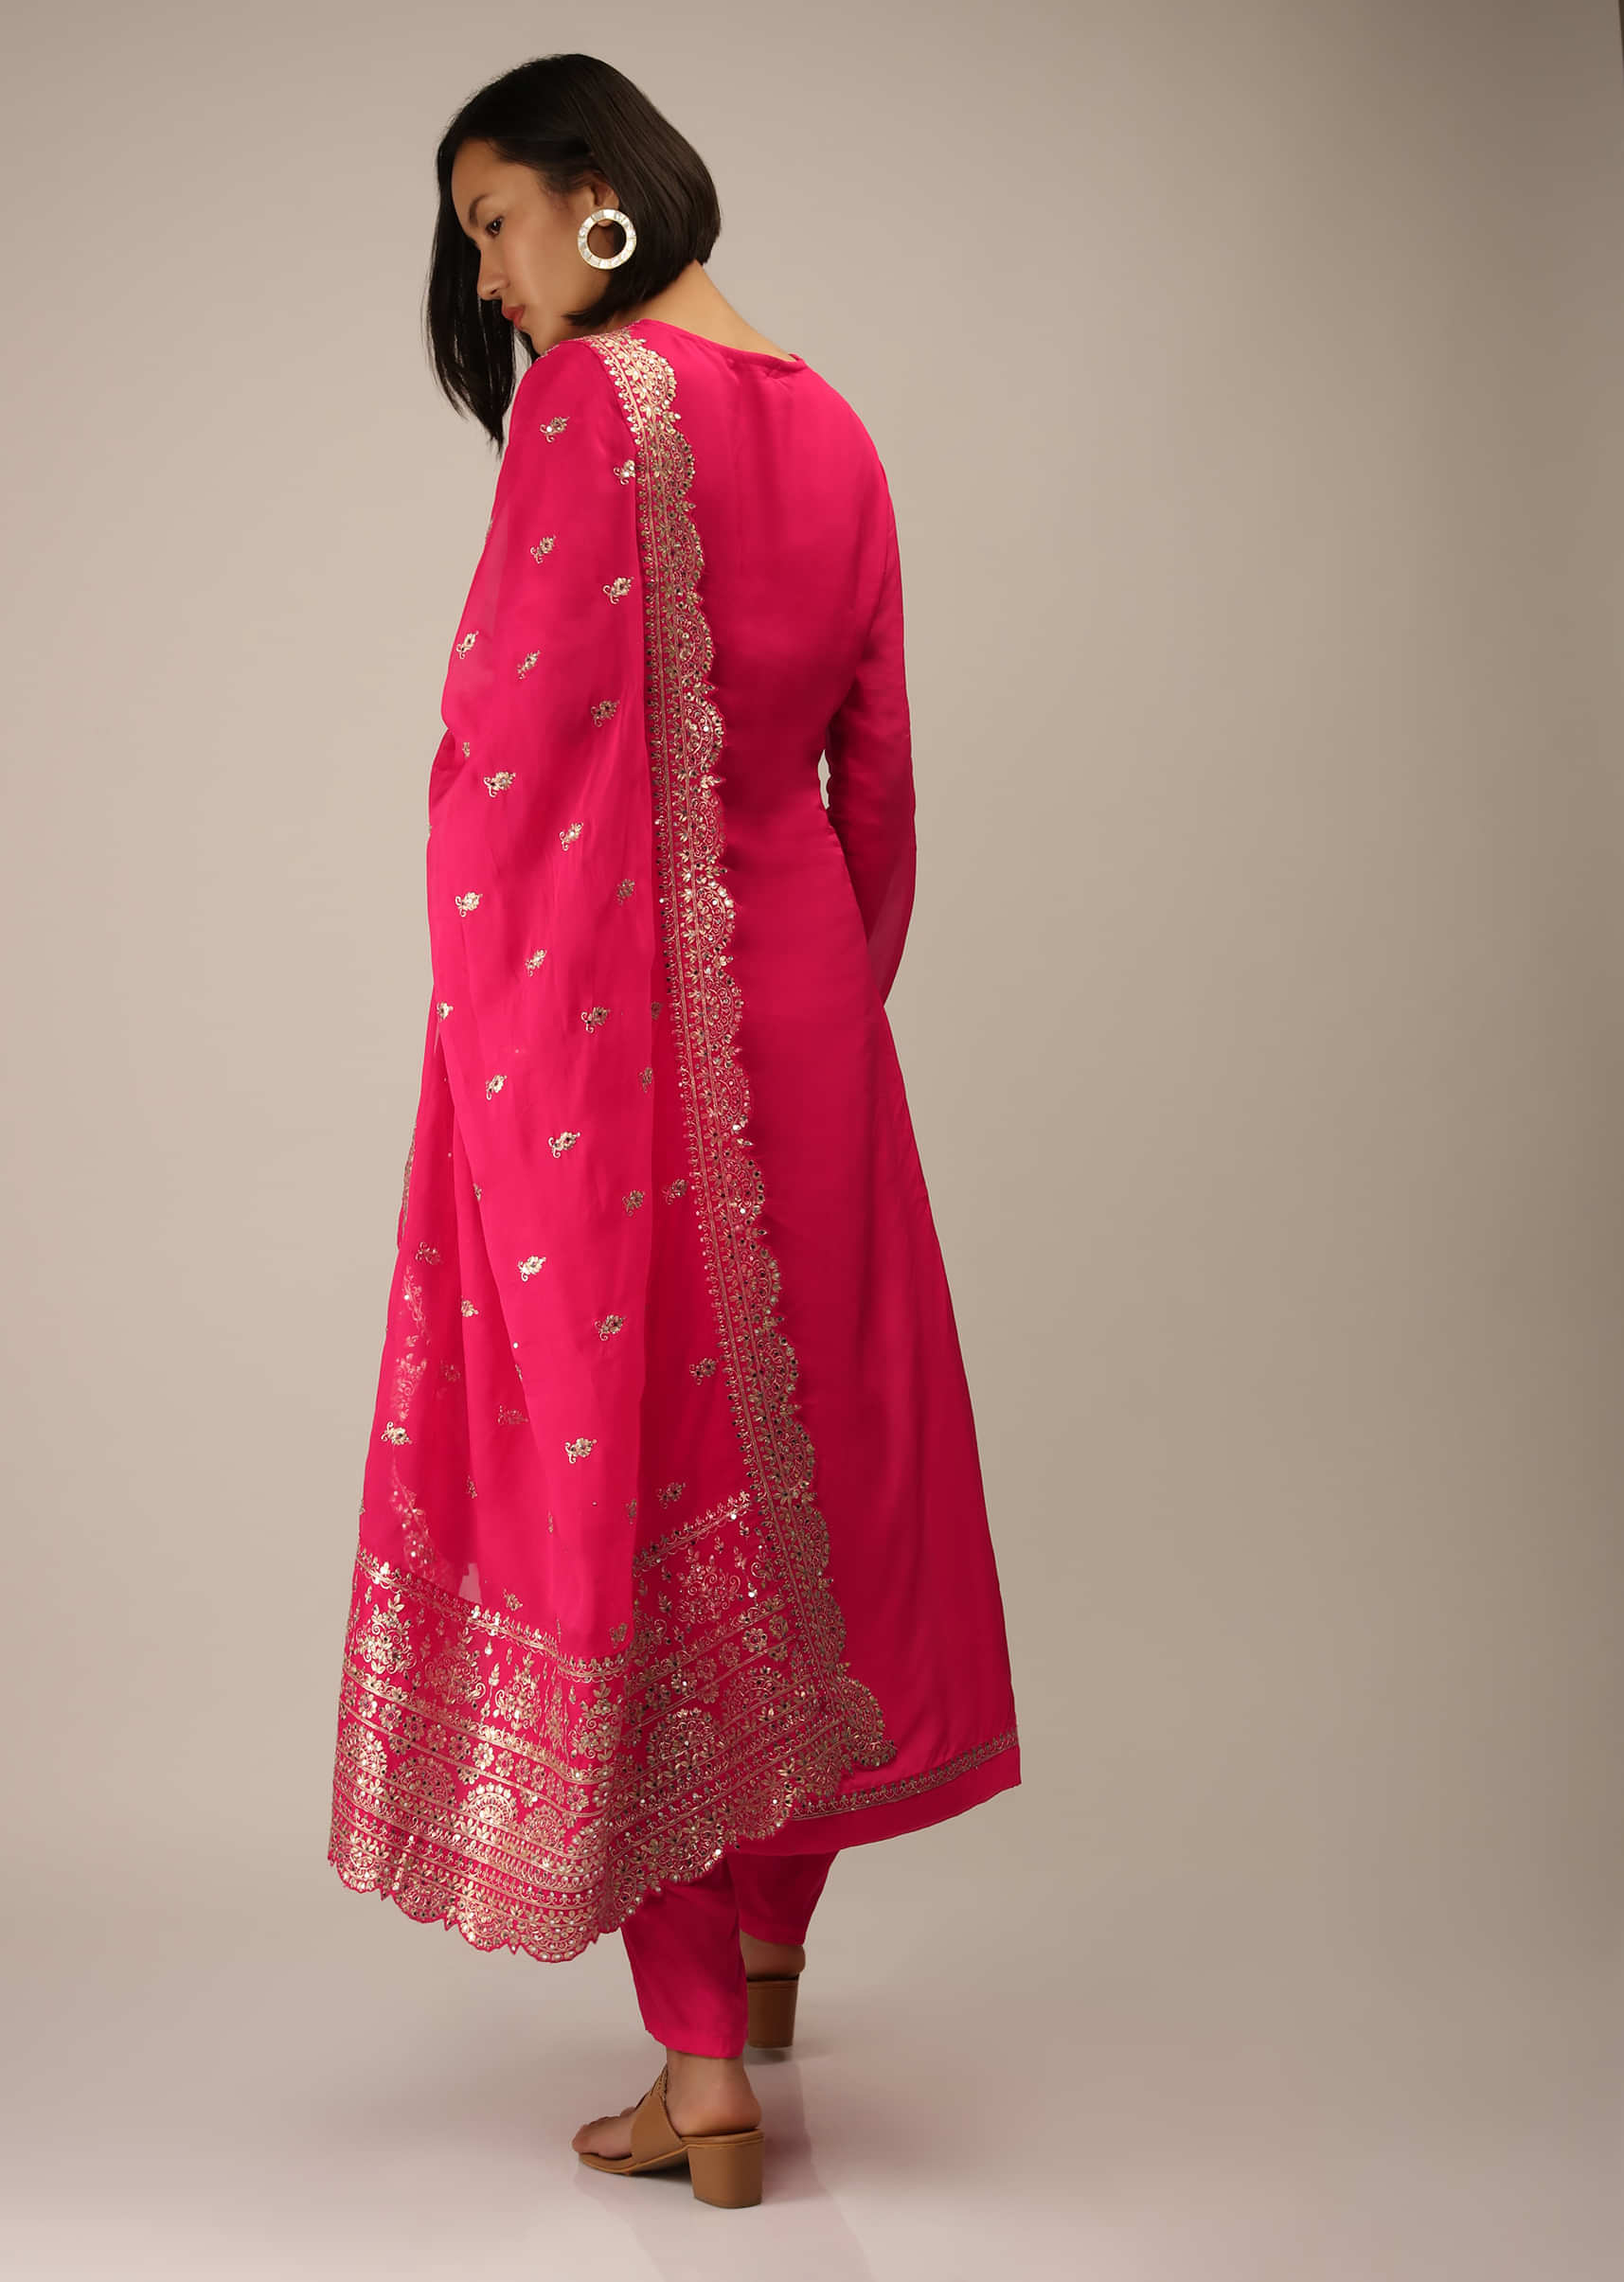 Hot Pink Straight Cut Suit In Organza Silk With Zari And Mirror Work And Full Sleeves